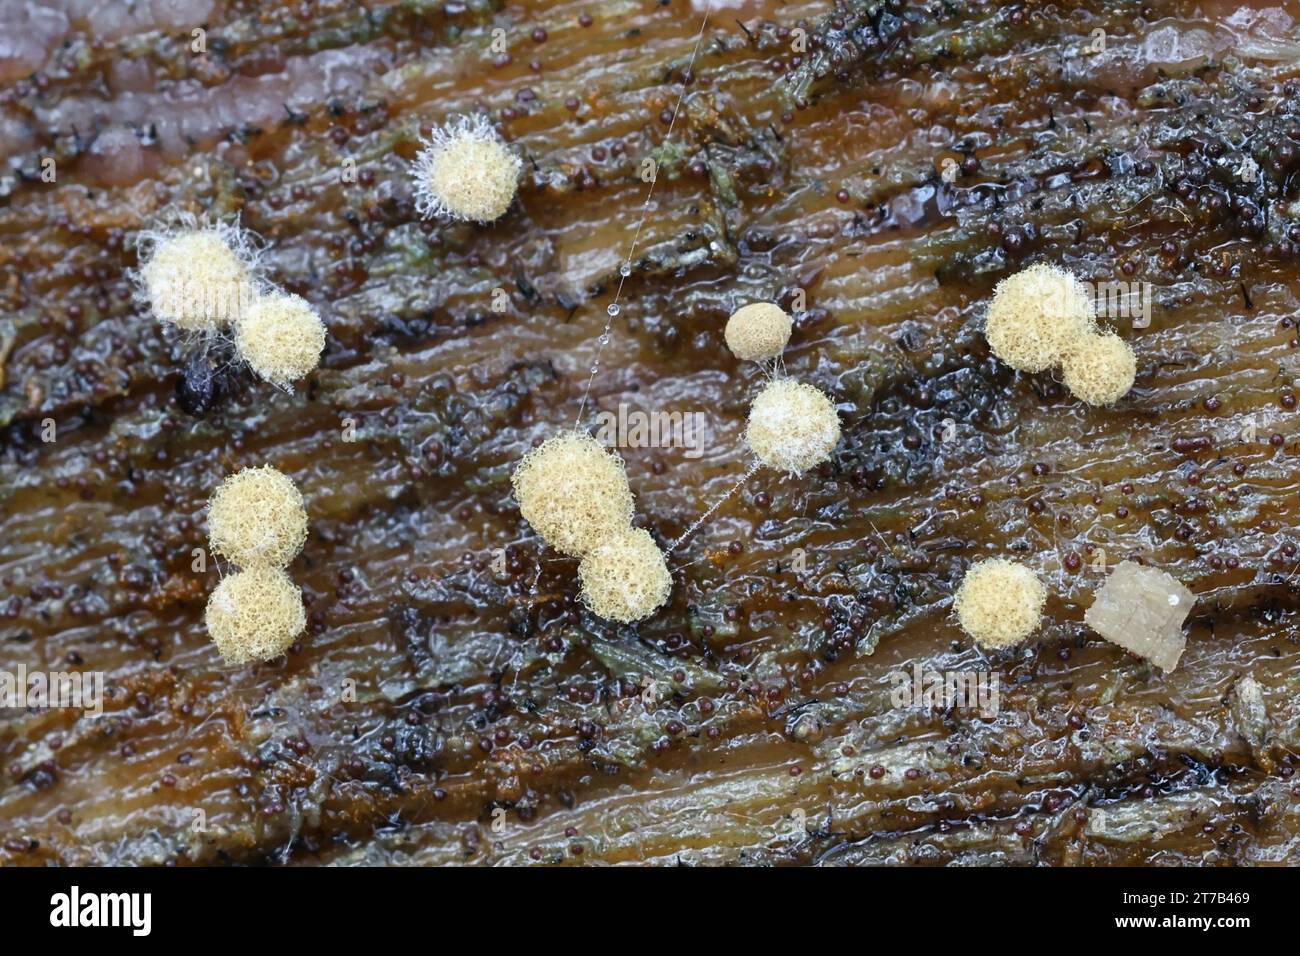 Arcyria pomiformis, a slime mold from Finland, no common English name Stock Photo